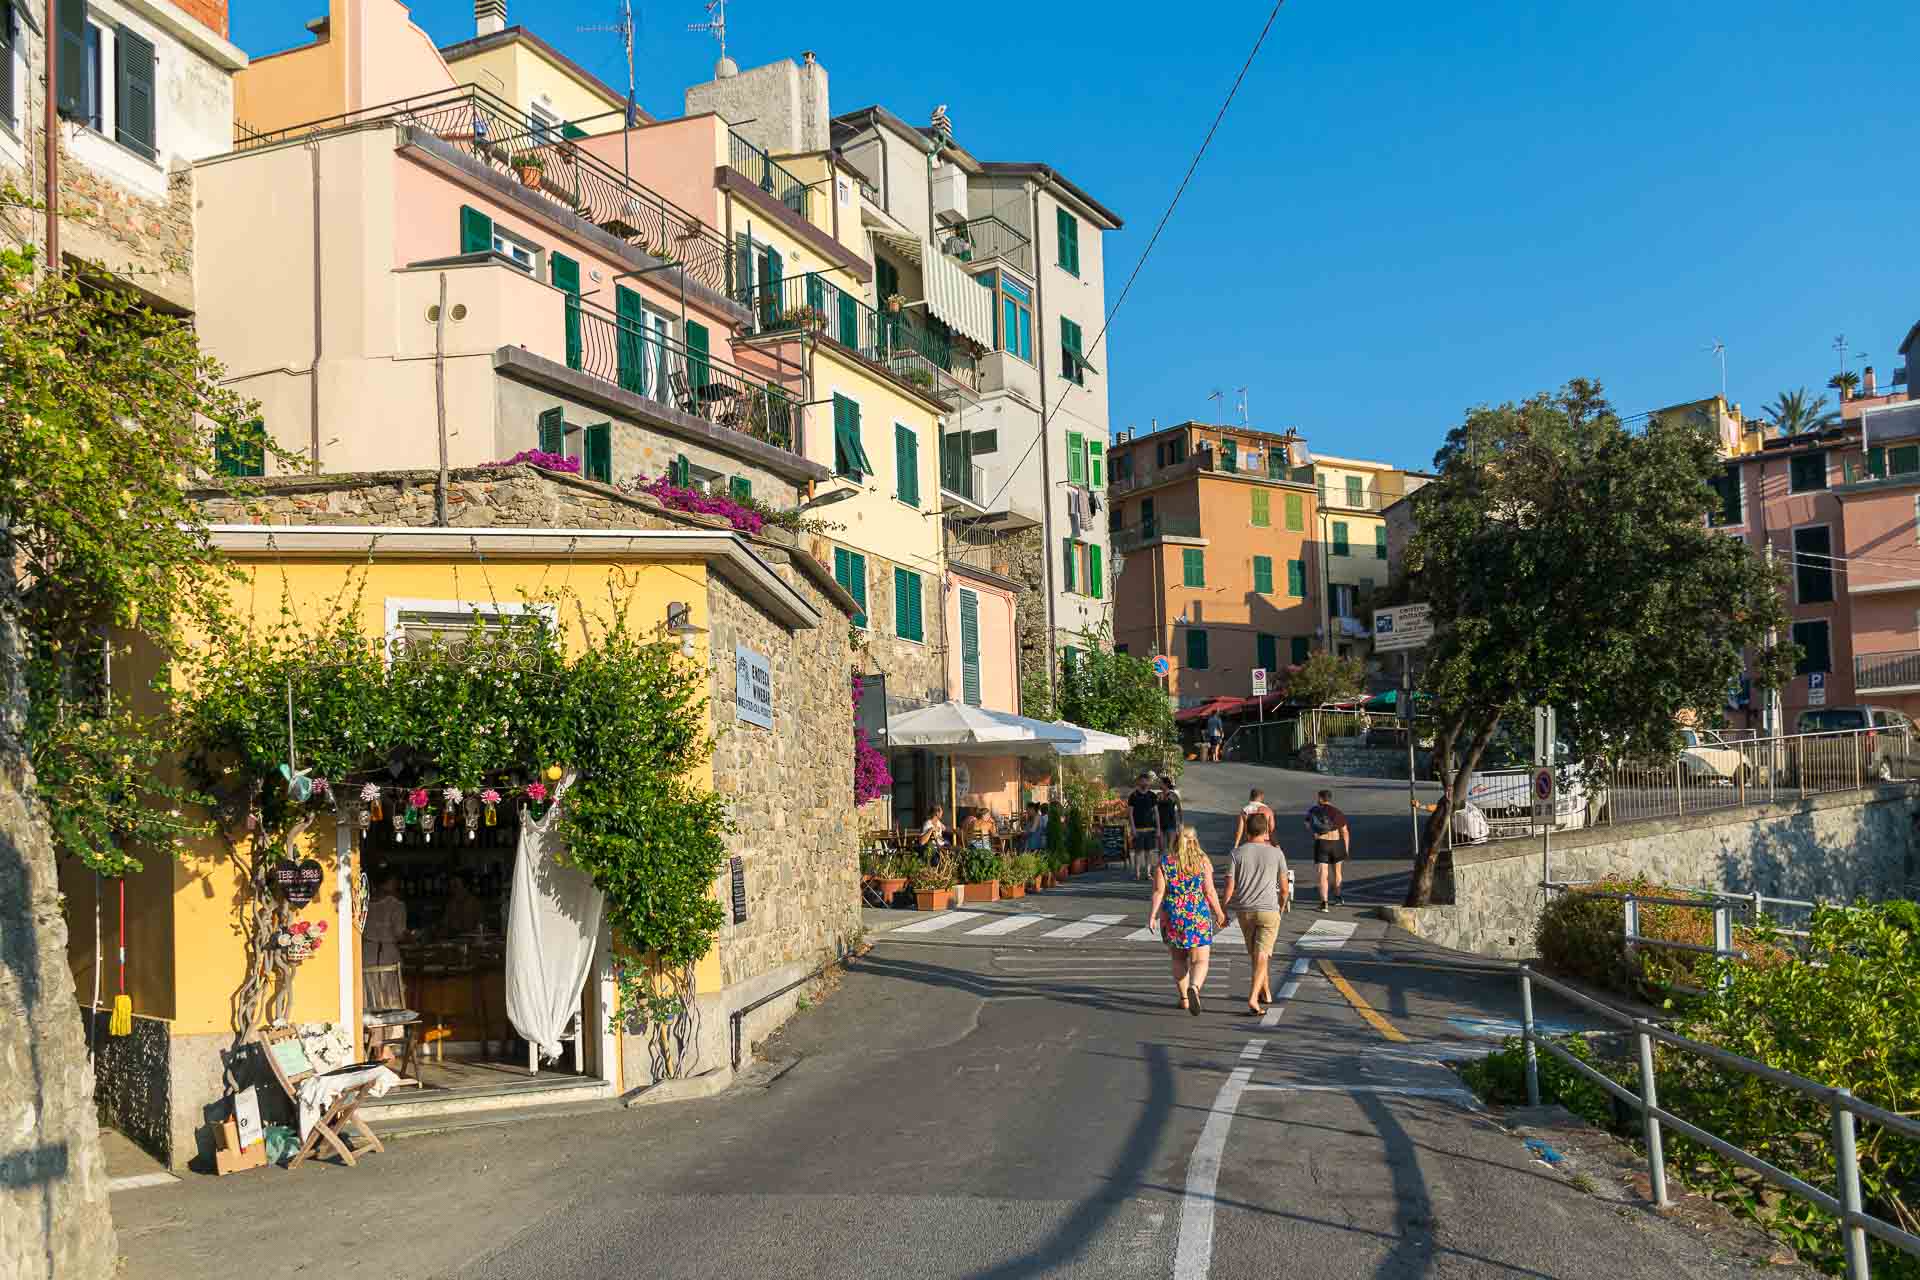 A slope street with houses on one side in Cinque terre